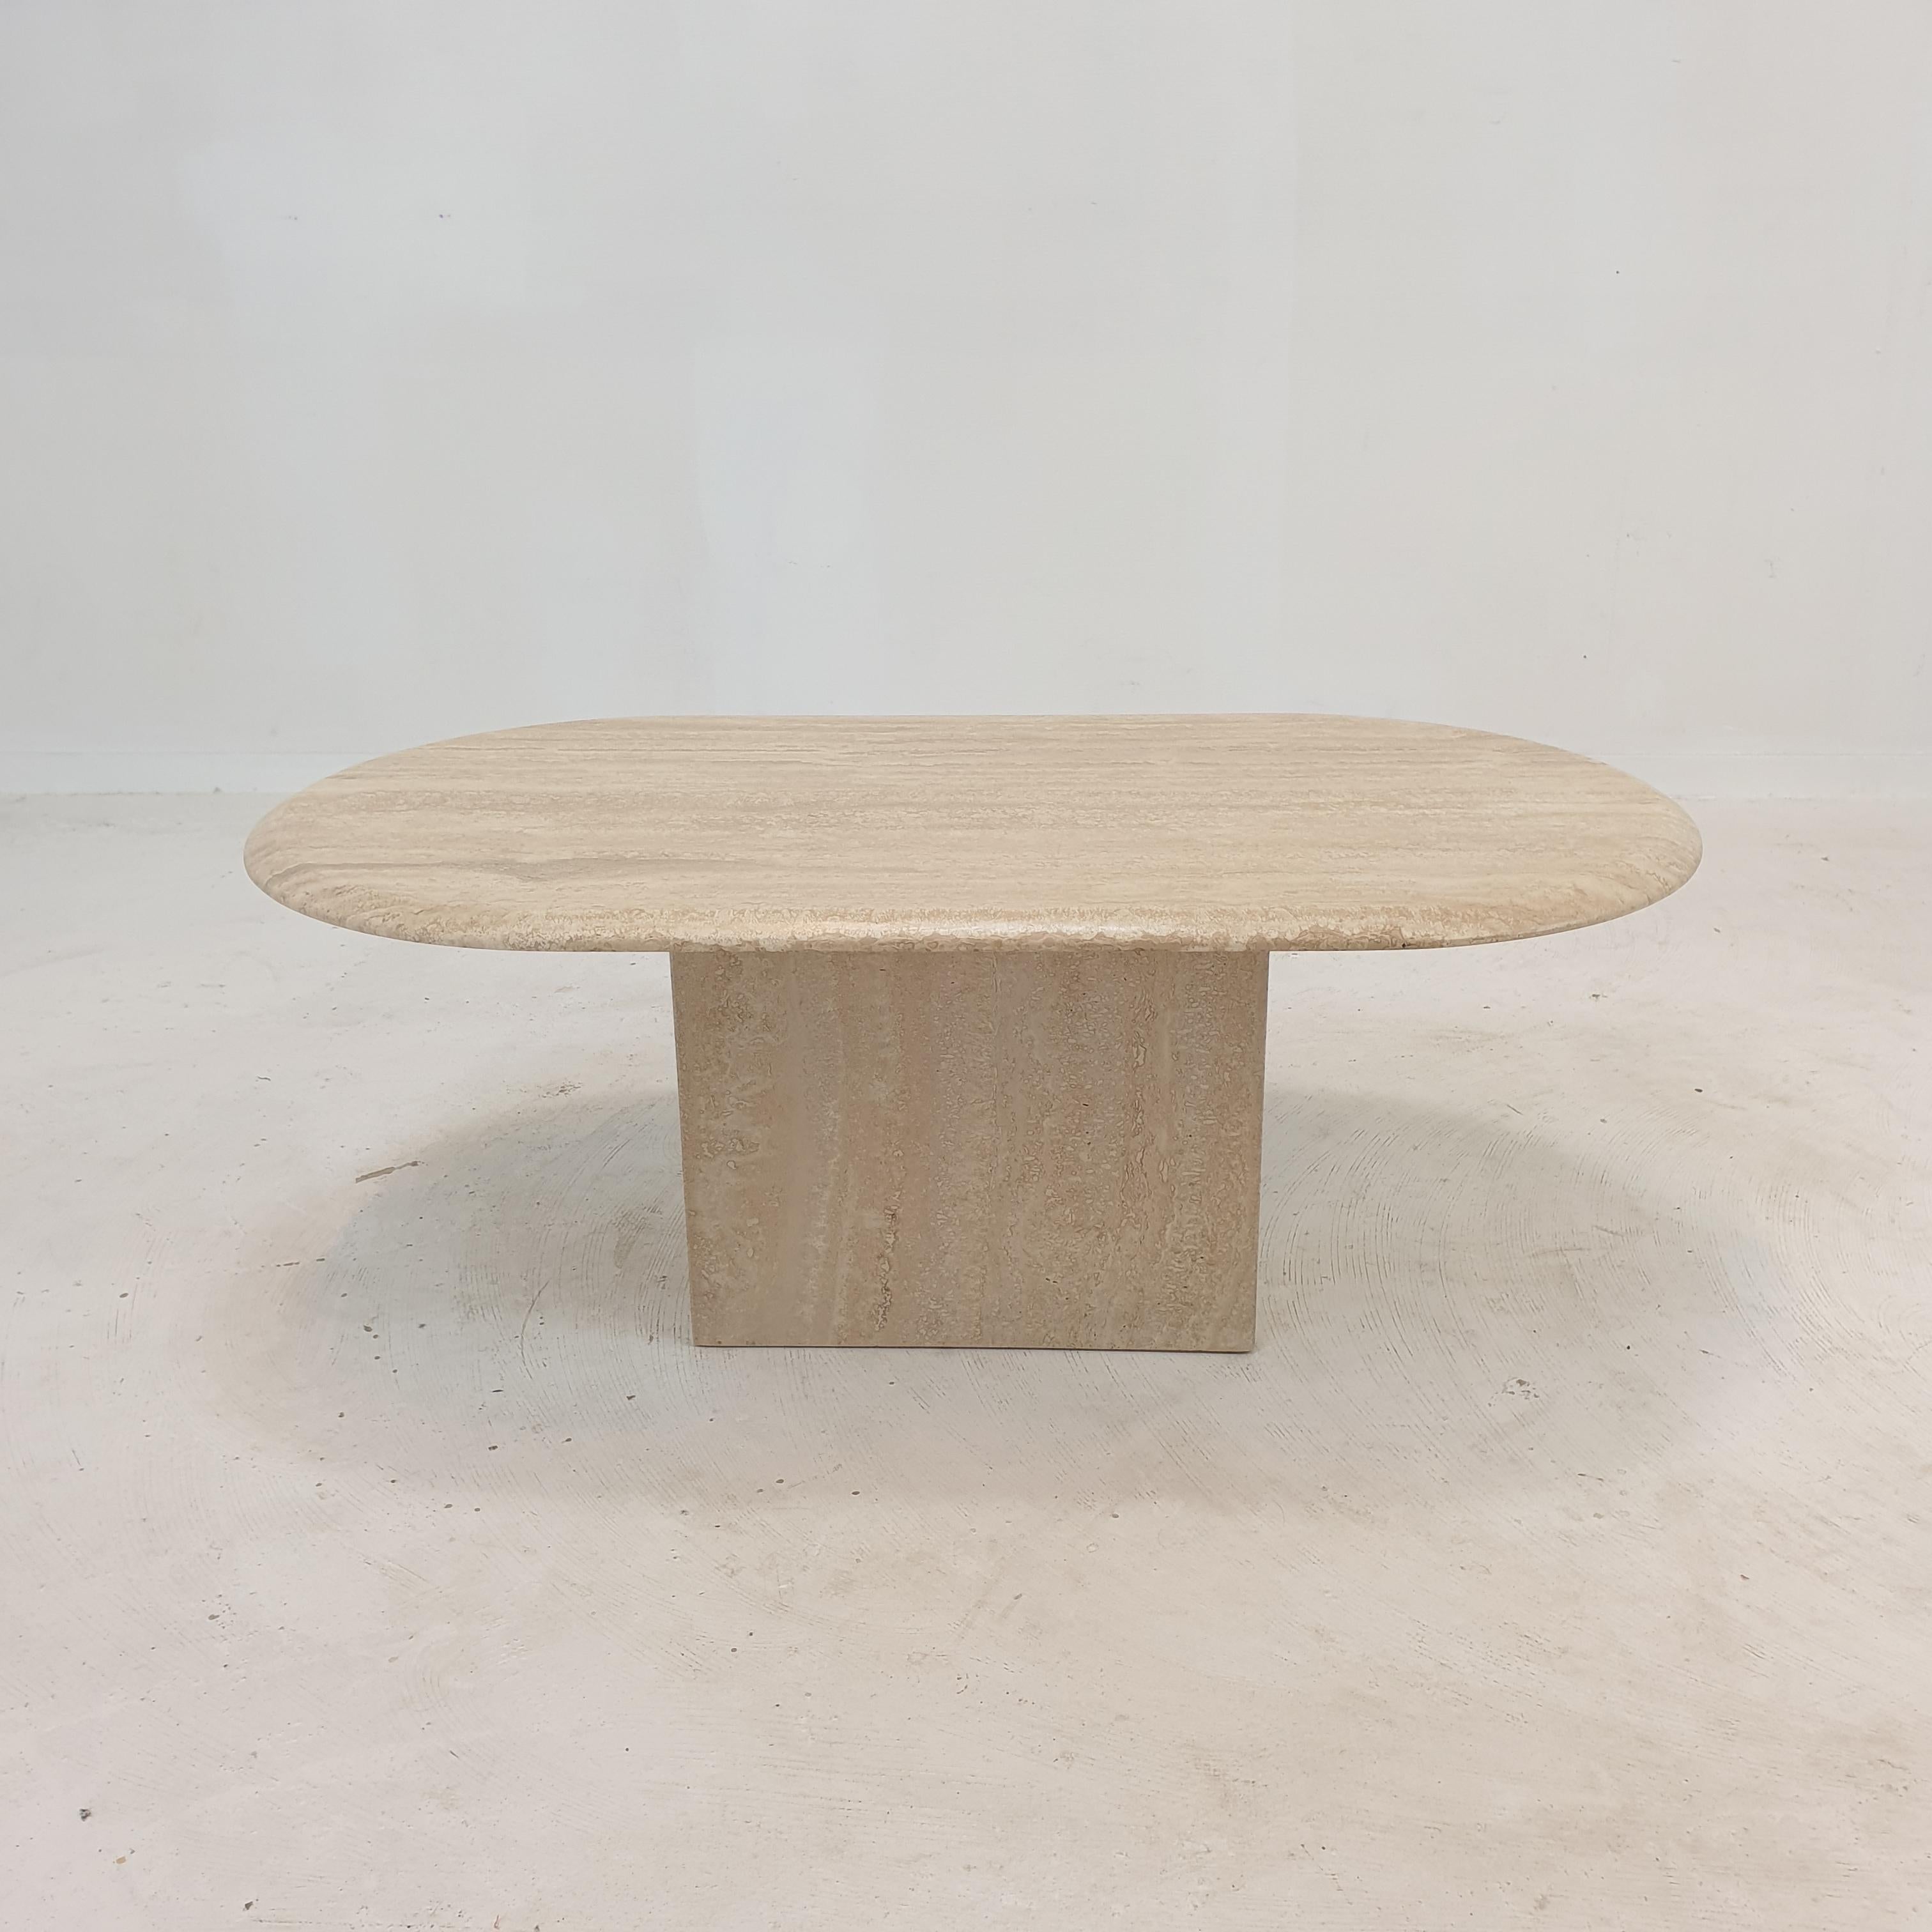 Very nice Italian coffee table handcrafted out of travertine, 1980's.

The beautiful oval top is rounded on the edge. 
It is made of beautiful travertine.

It has the normal traces of use, see the pictures.

We work with professional packers